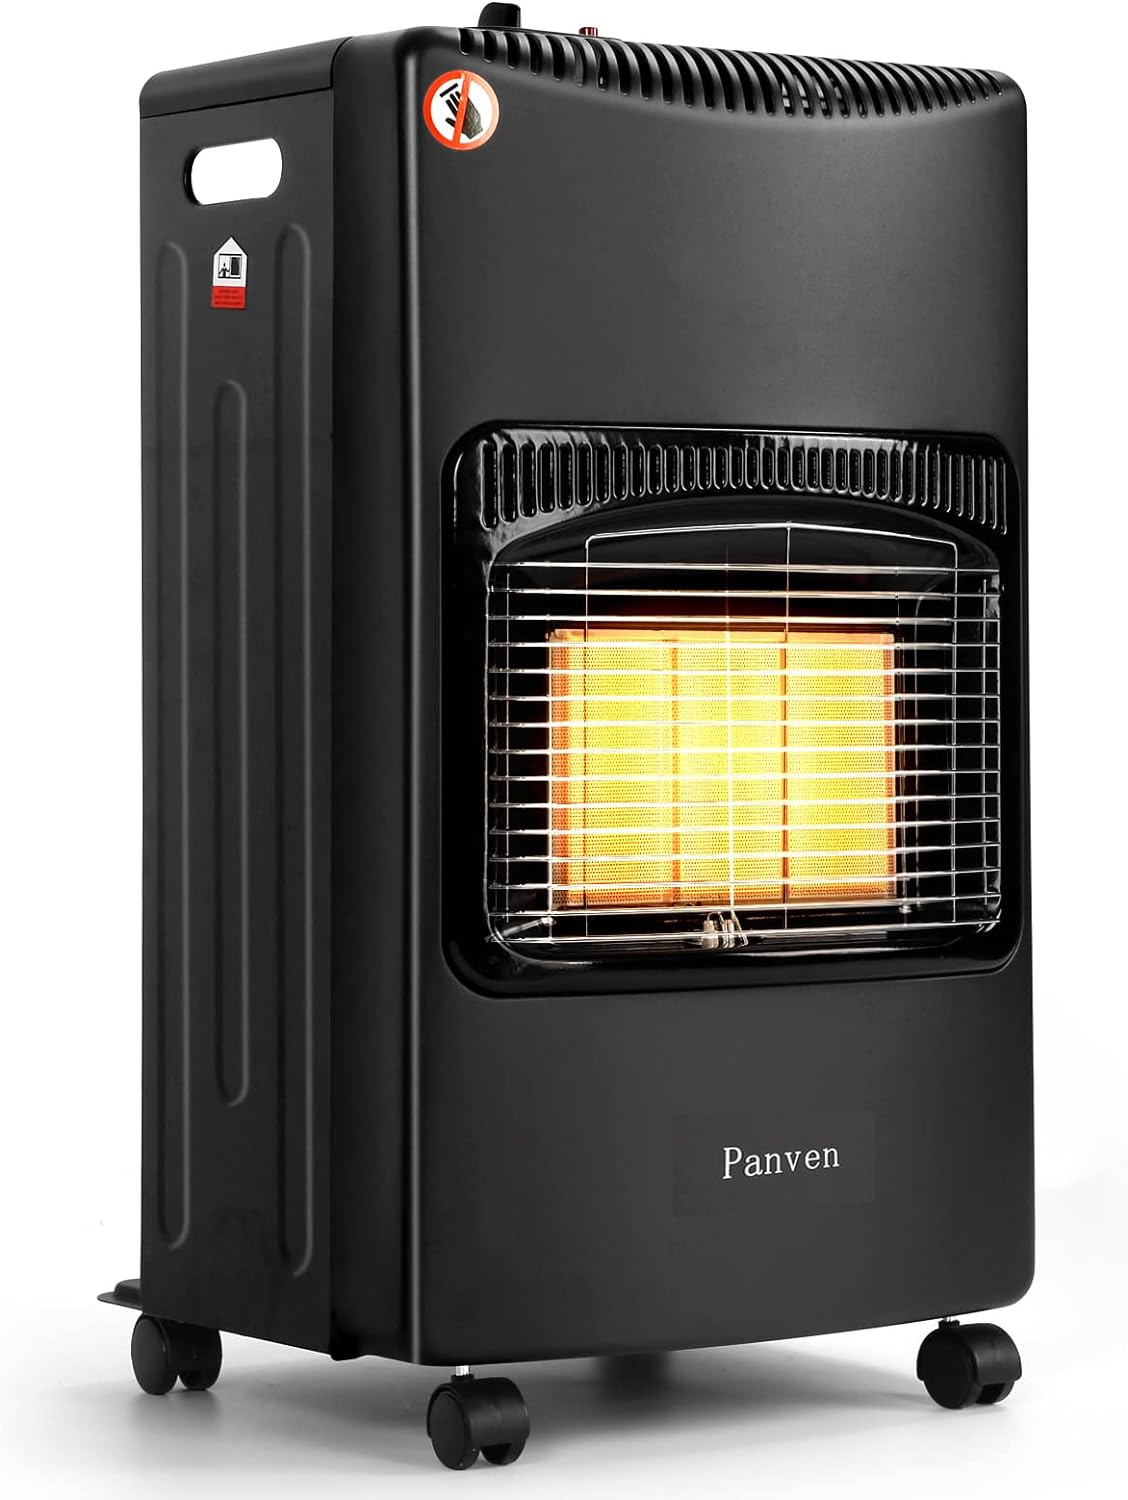 Panven Patio Propane Heater, 18,000 BTU Portable Gas Infrared Heaters for Outdoor Use, Suitable for 20lb 30lb Propane - Panven Patio Propane Heater Review